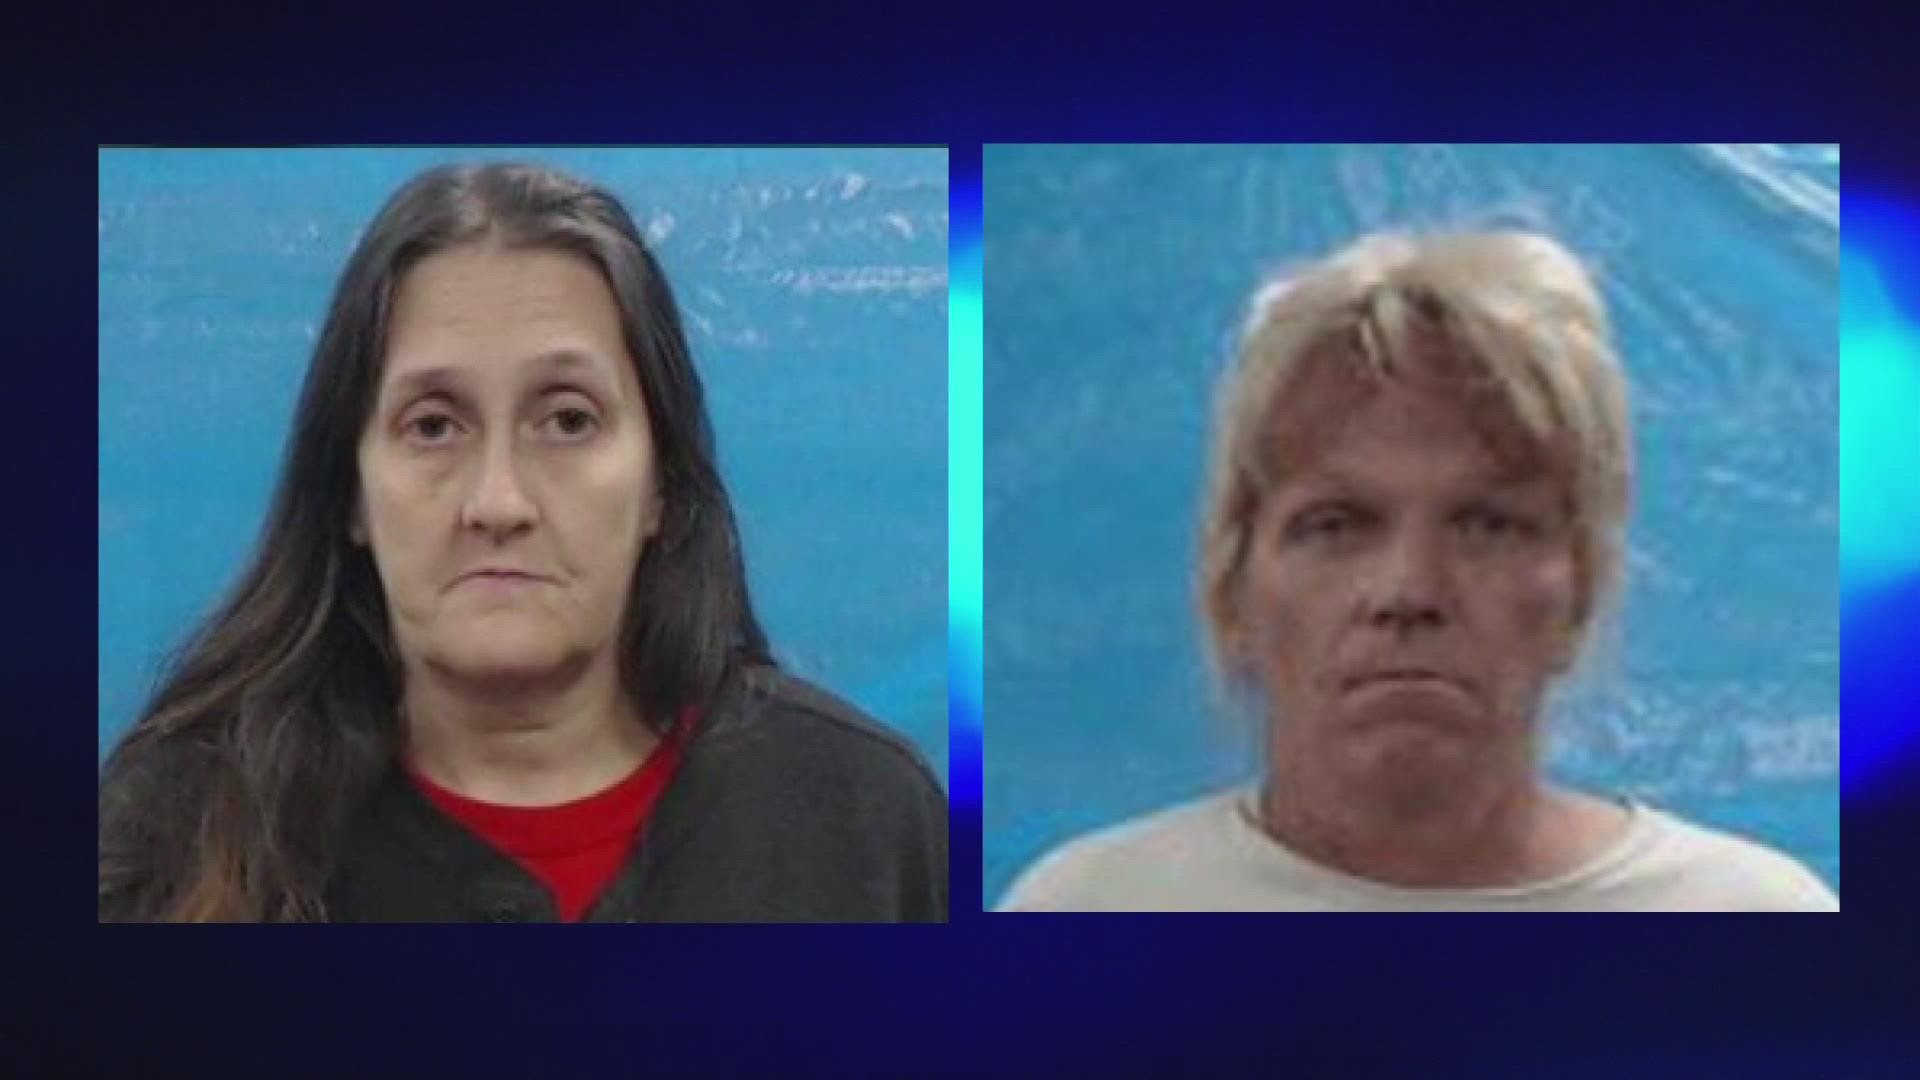 DA Husband and wife convicted of murder after 72-year-old mother starved to death wbir picture